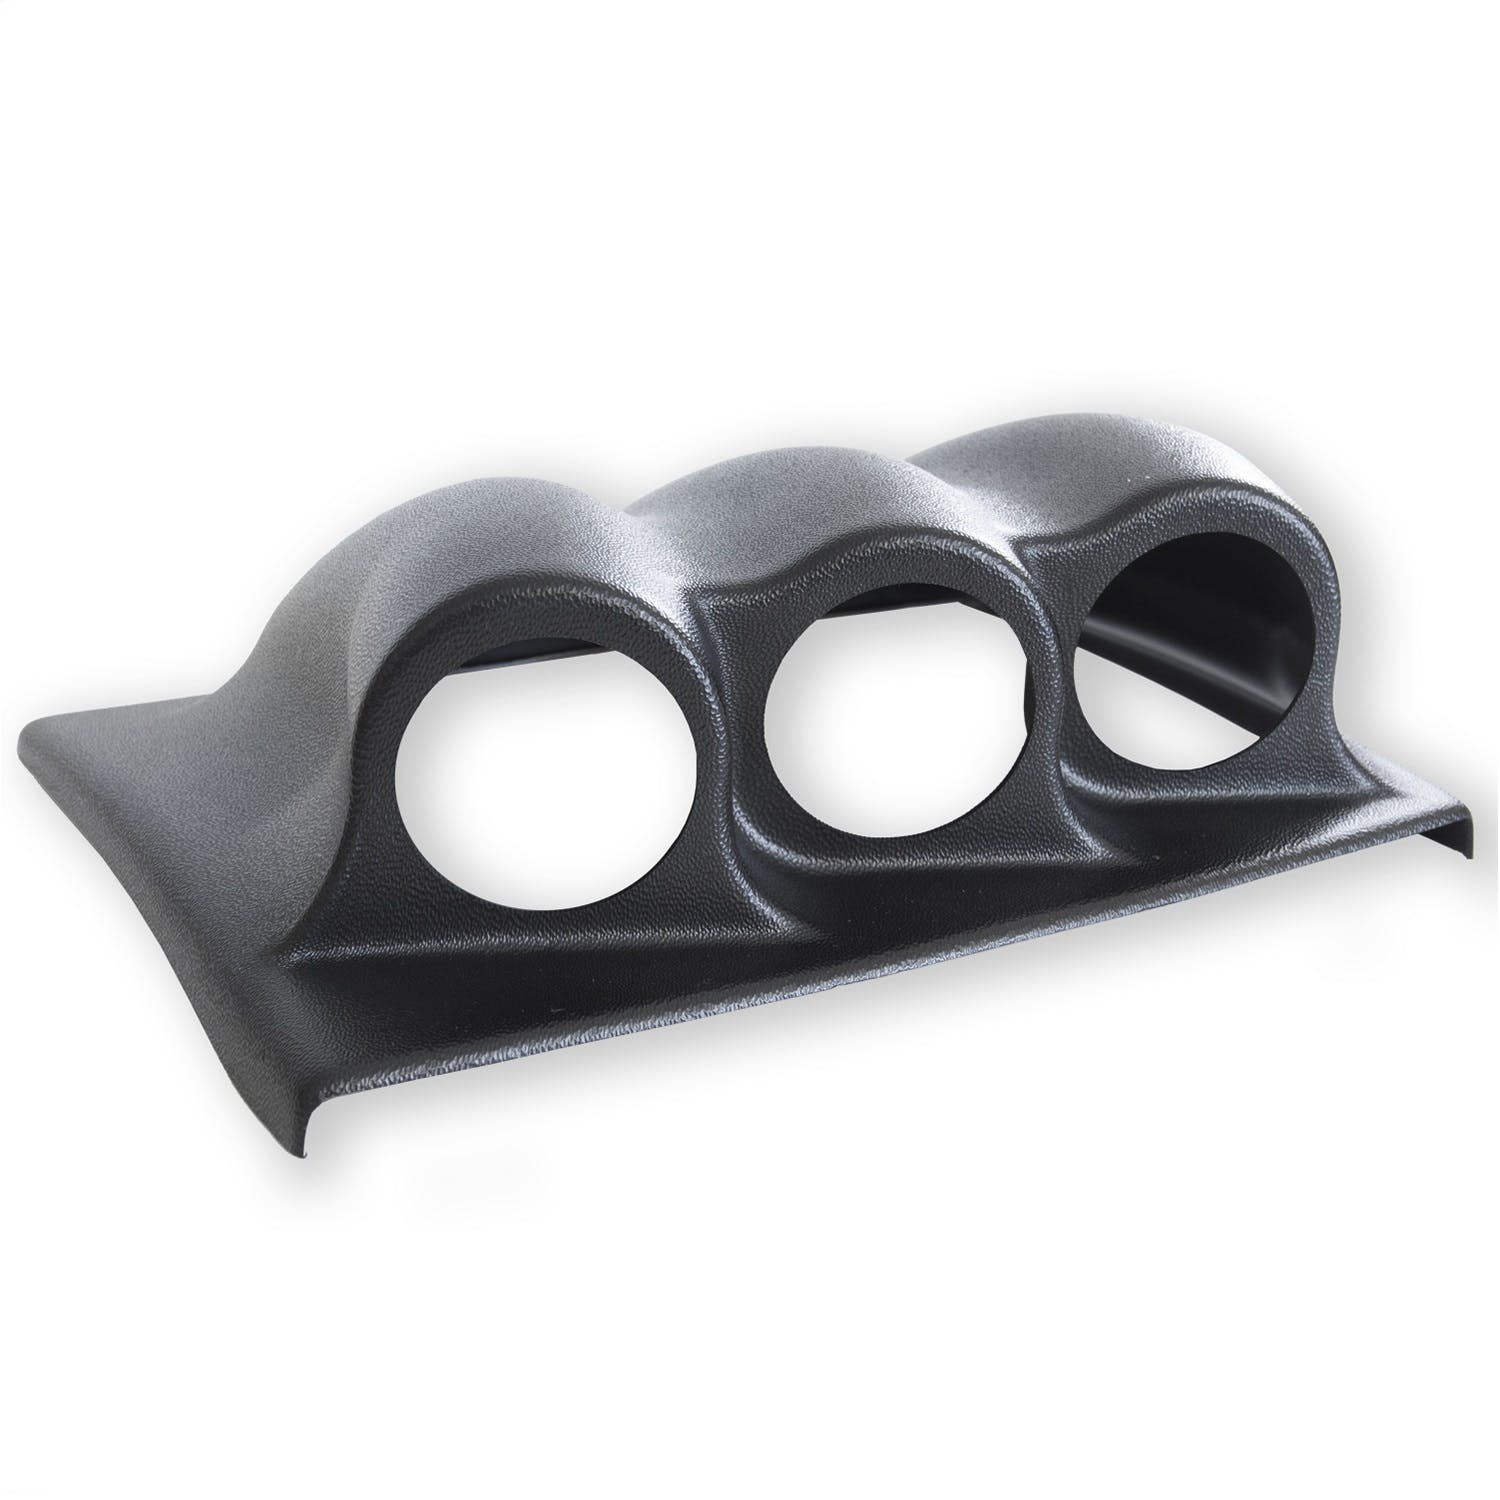 AutoMeter Products 5380 Triple Dash Pod Holds 3 2 1/16 in. Mount Above The Dash Center Stack Black